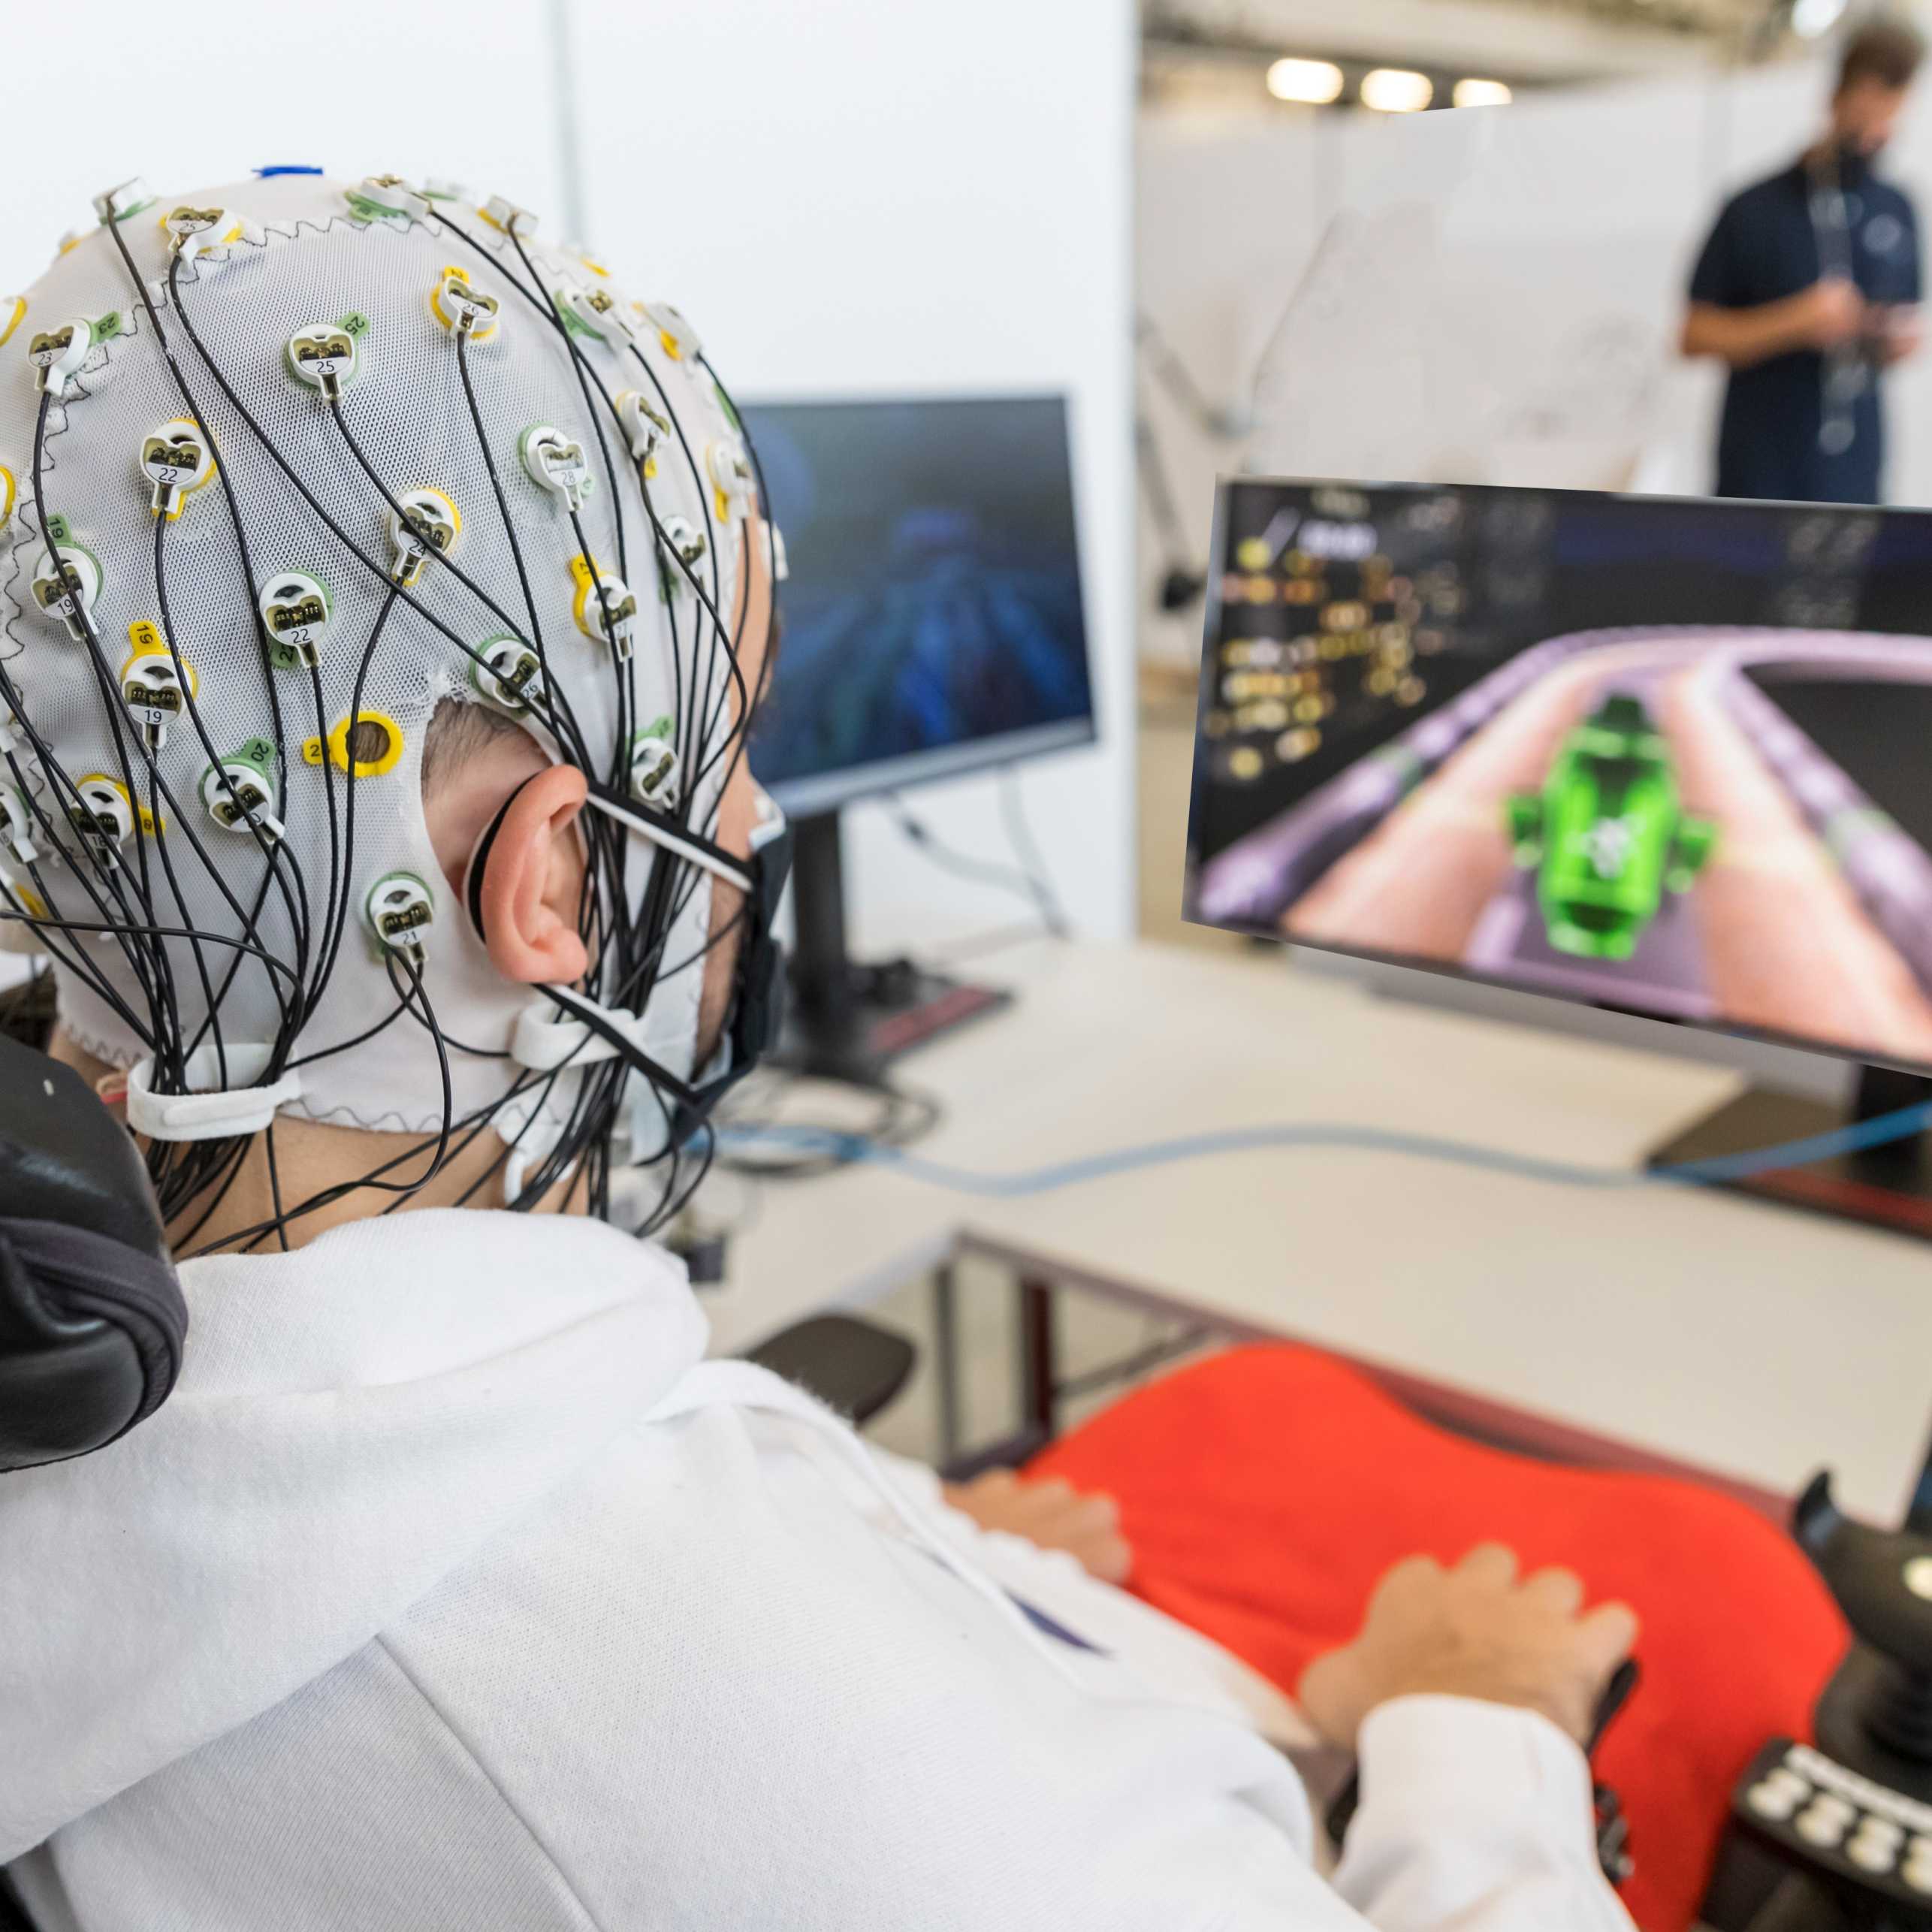 Scholar seen from the back wearing a Brain Comuter Interface (BCI) headset while playing a video game.